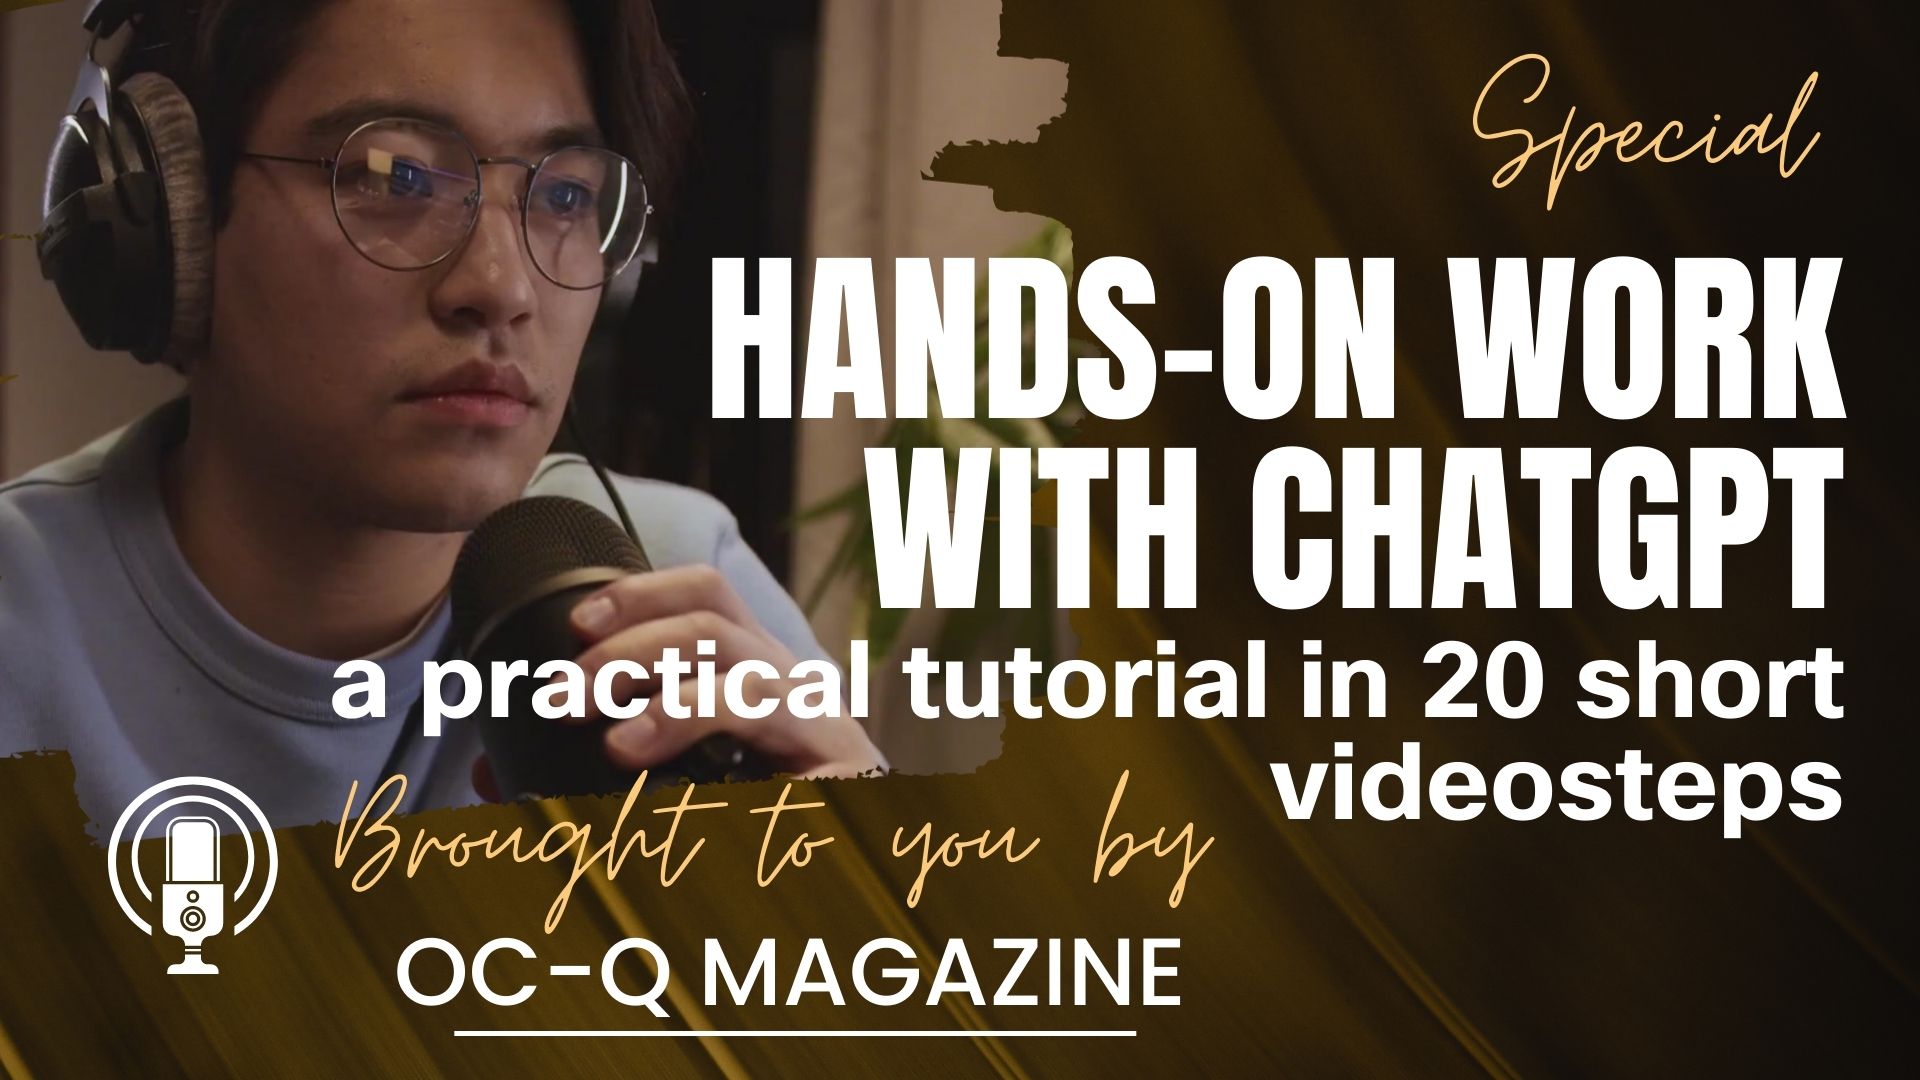 hands on work with chatgpt - tutorial brought to you by oc-q magazine